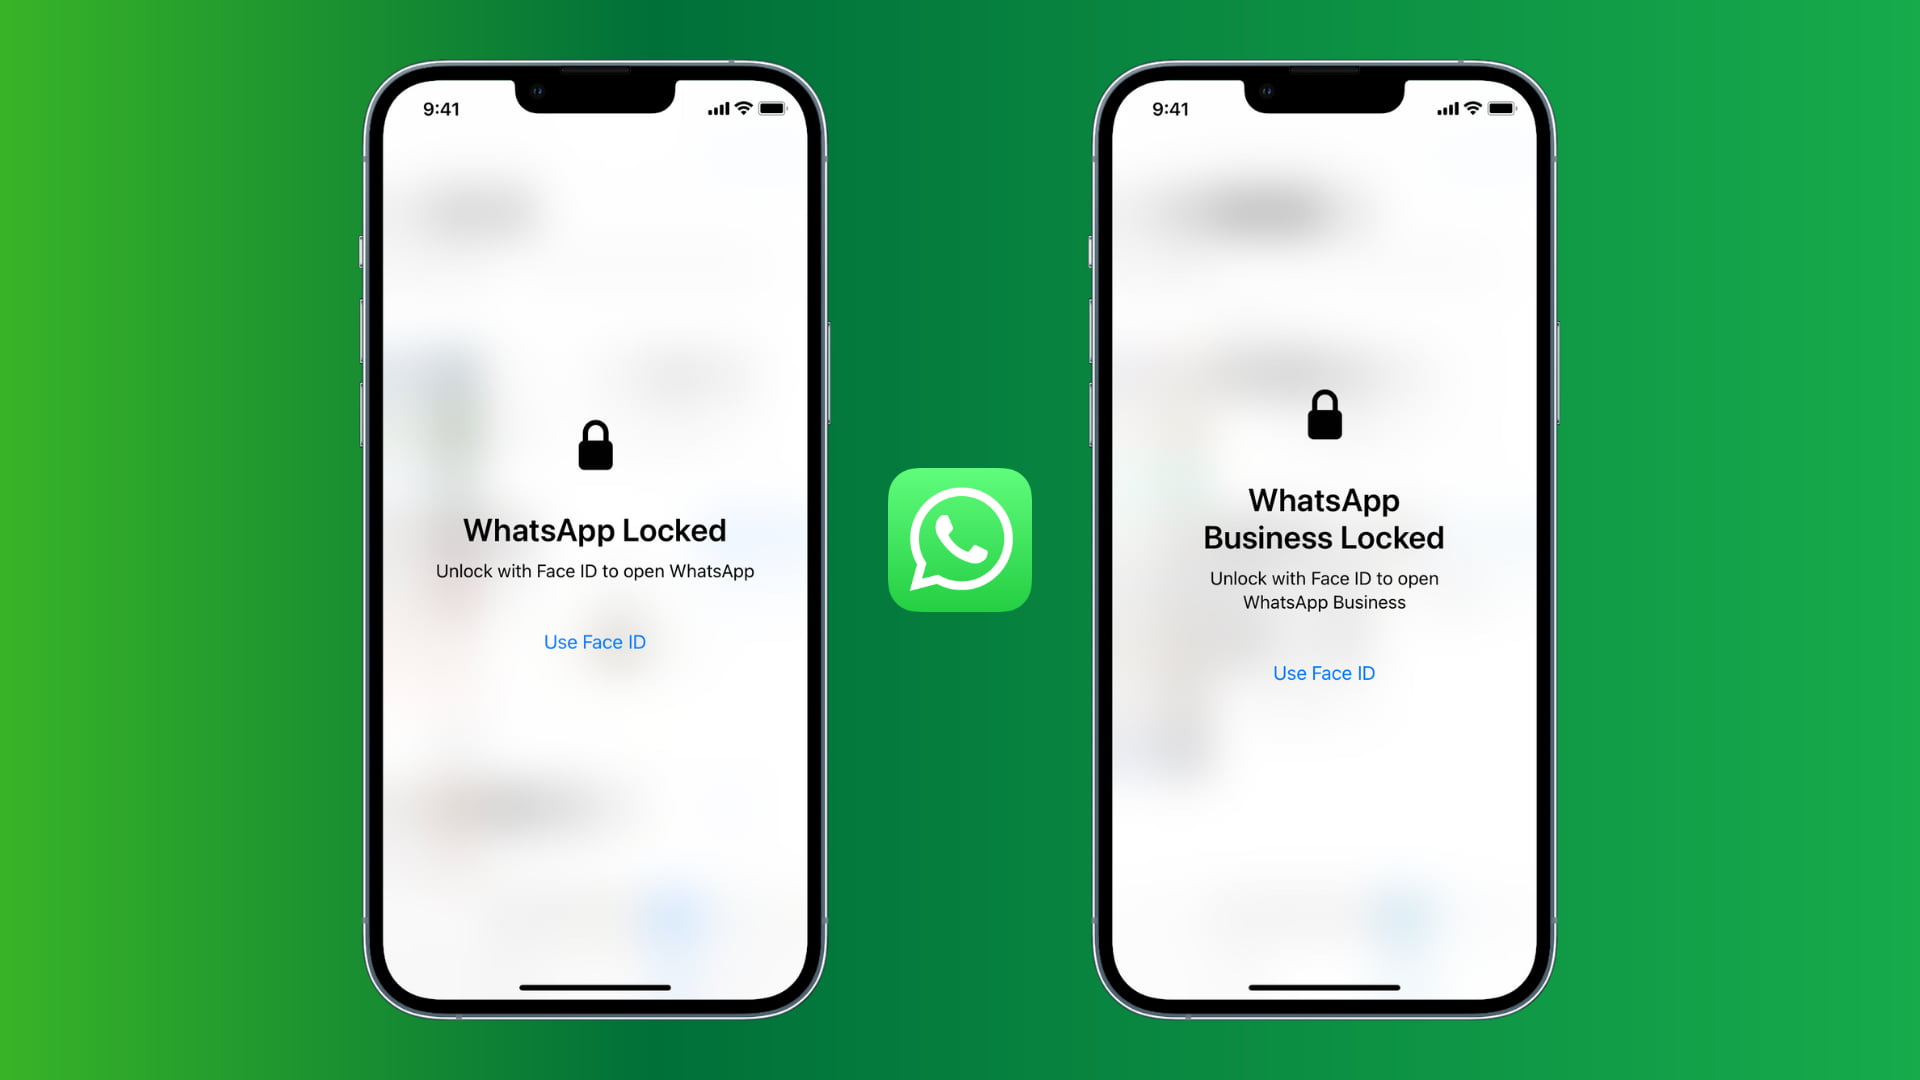 Two iPhones on a gradient green background showing locked WhatsApp and locked WhatsApp Business